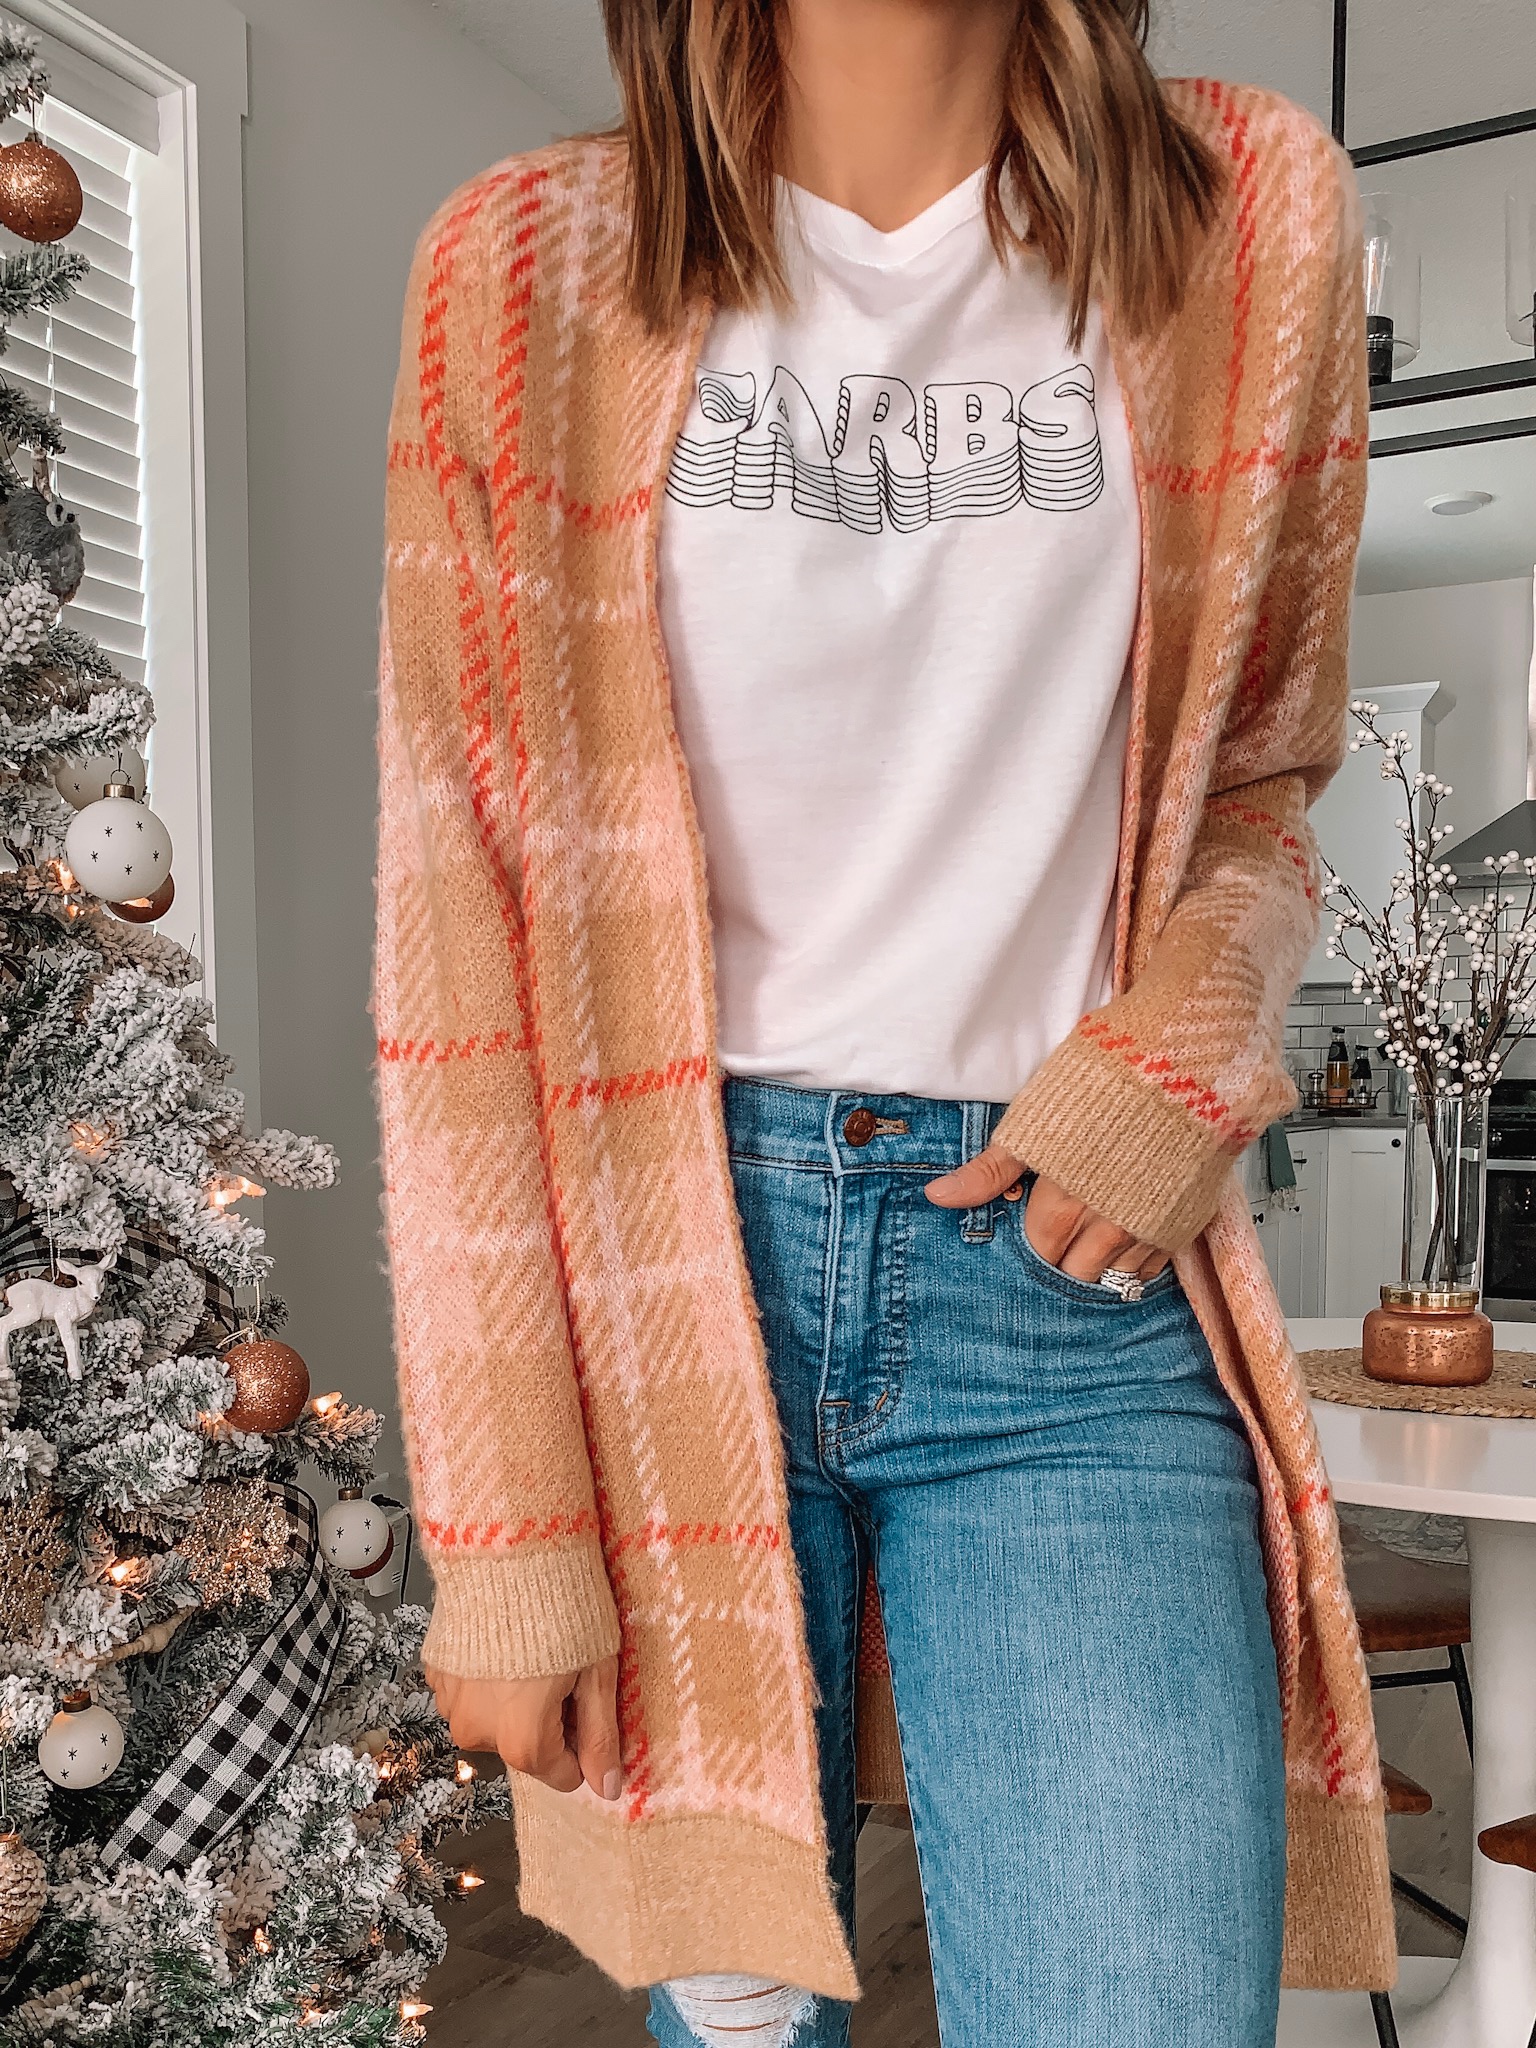 thanksgiving outfit ideas, cute, comfy, Nordstrom, plaid cardigan